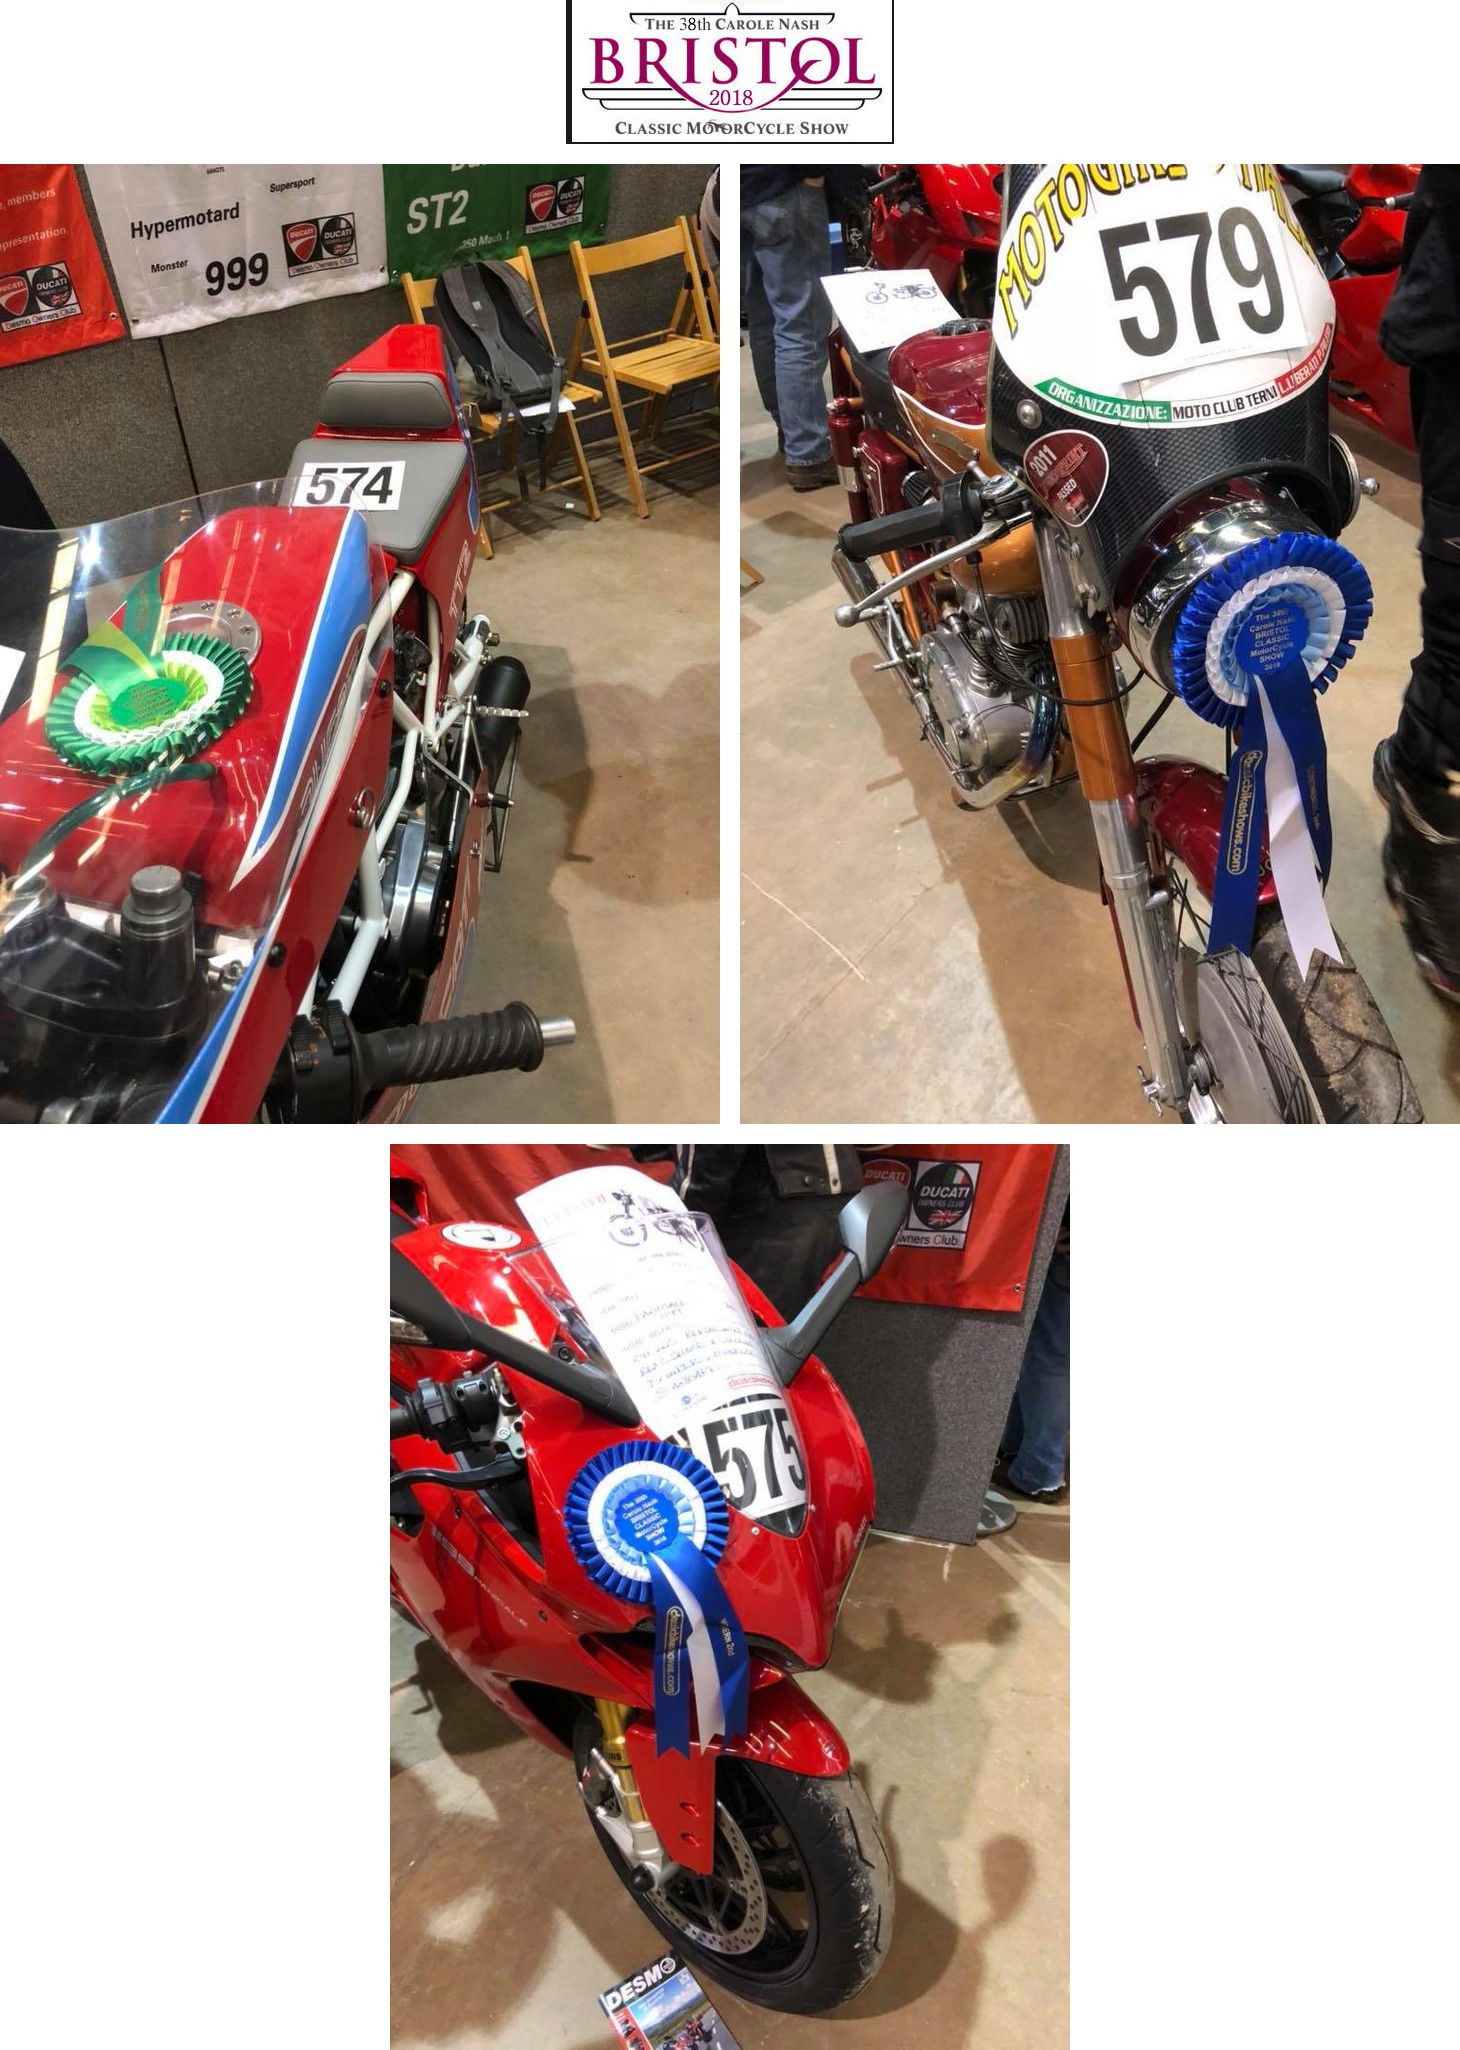 DOC GB stand at Bristol Classic Motorcycle Show 3rd &4th Feb 2018